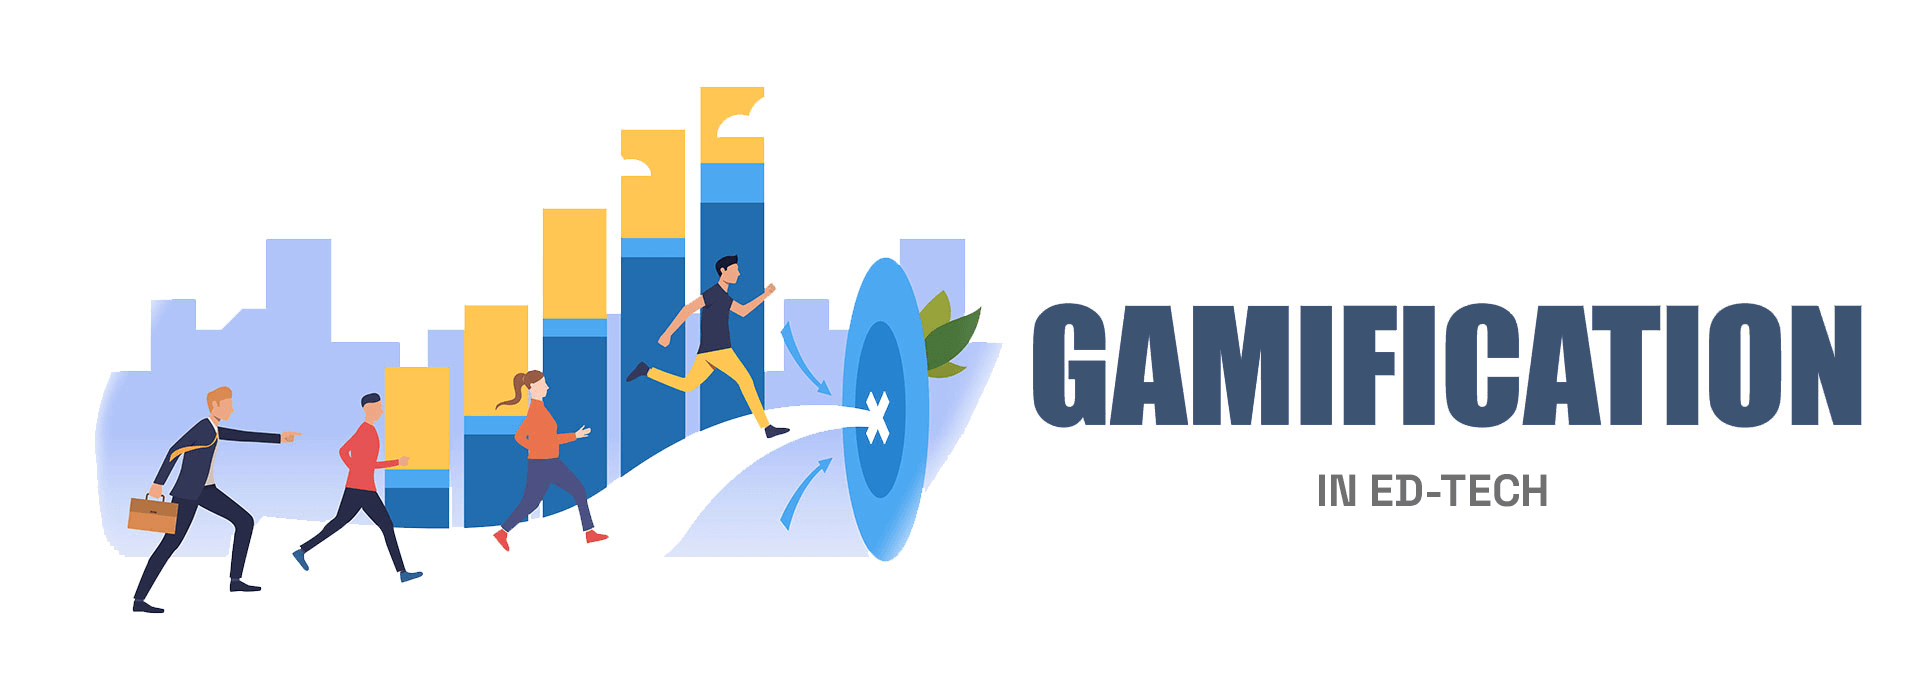 Gamification In The Ed-Tech Industry